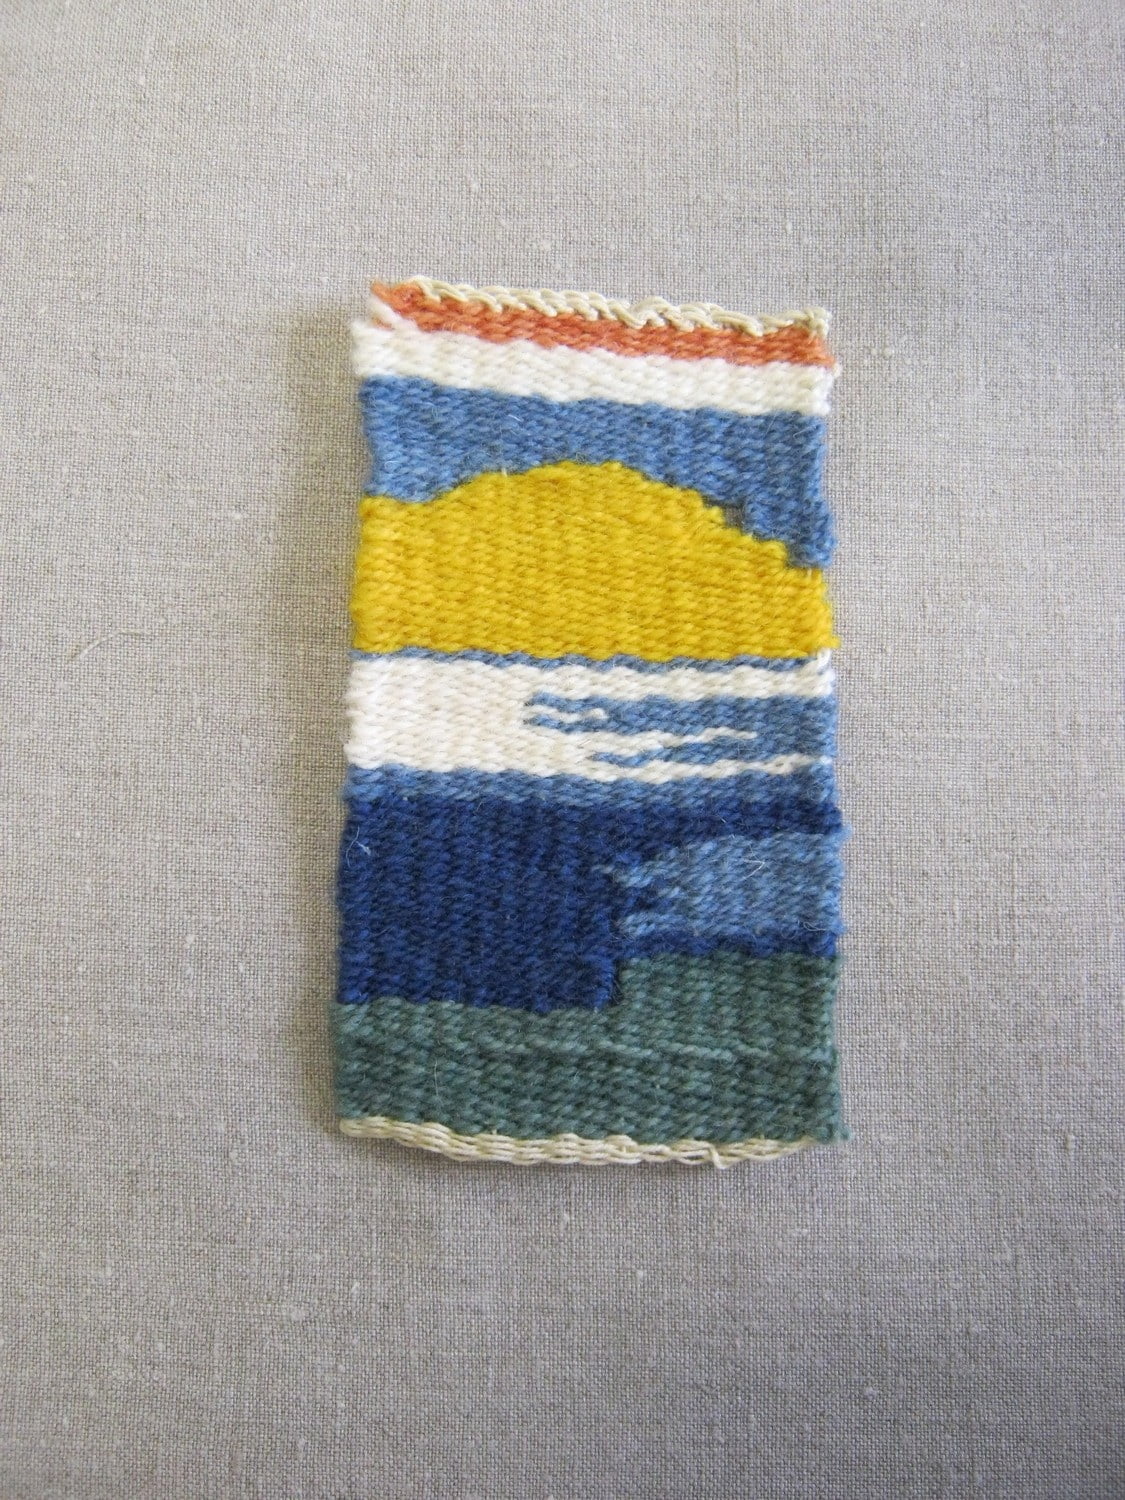 April Tapestry Class